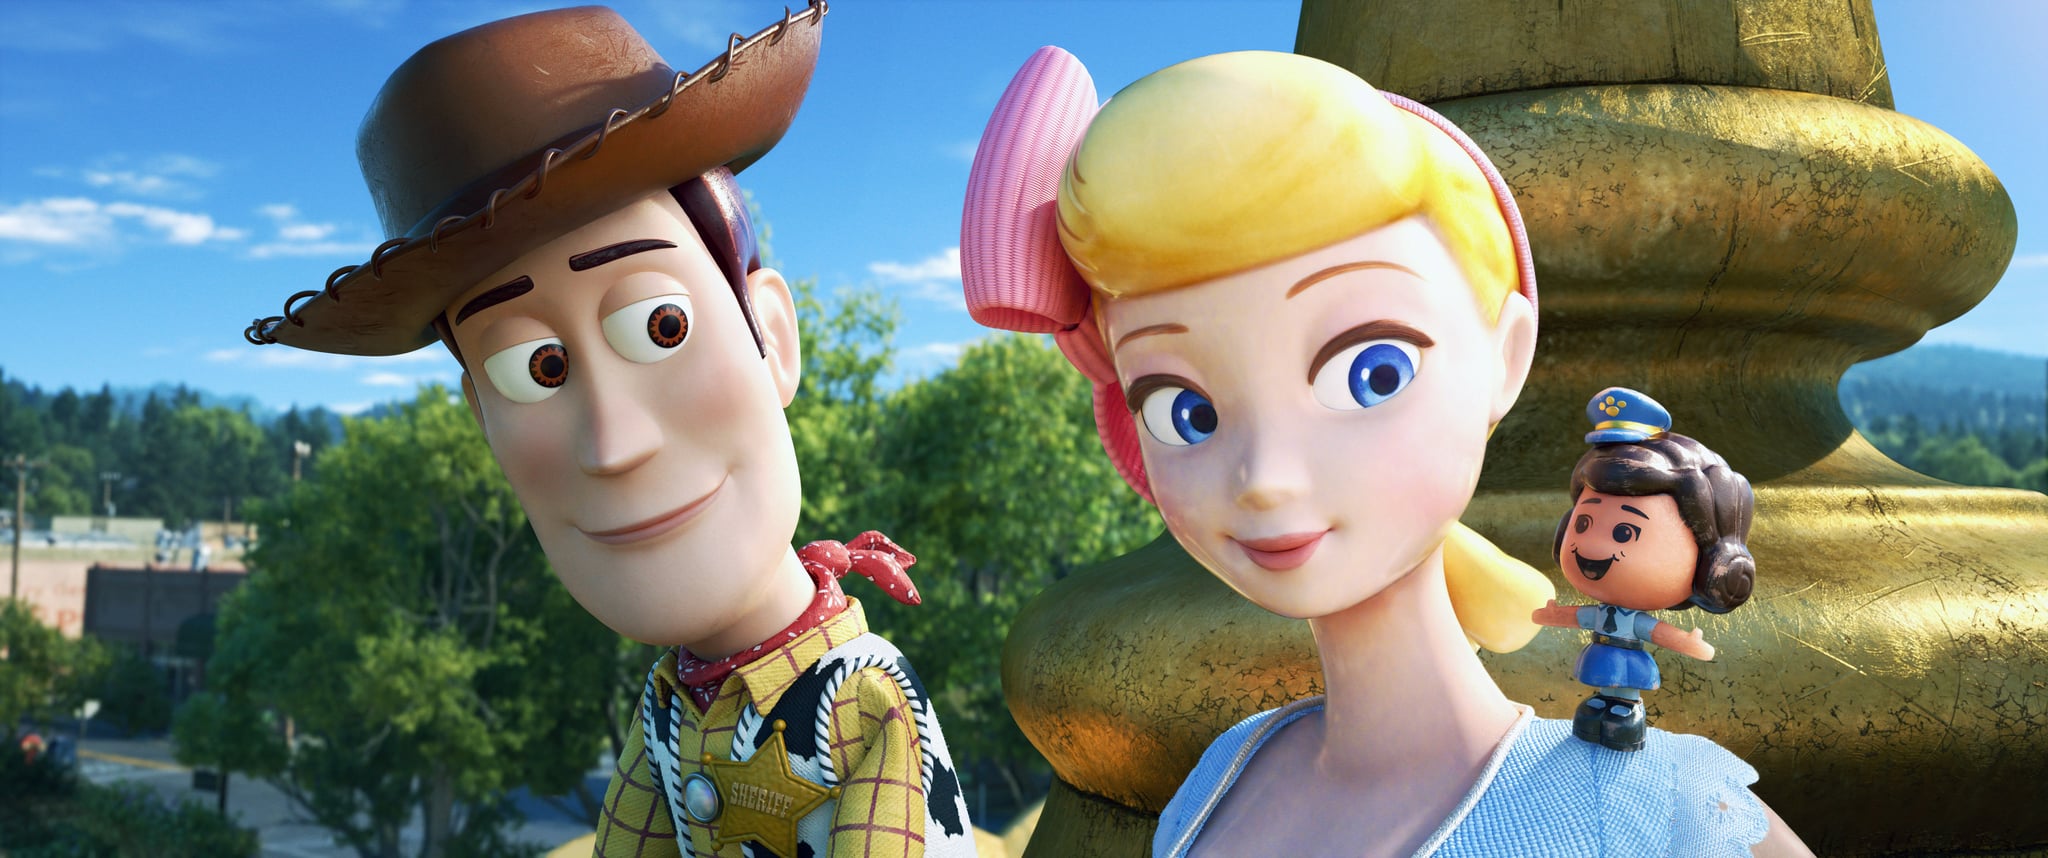 TOY STORY 4, from left: Woody (voice: Tom Hanks), Bo Peep (voice: Annie Potts), Giggles McDimples, 2019.  Walt Disney Studios Motion Pictures / courtesy Everett Collection